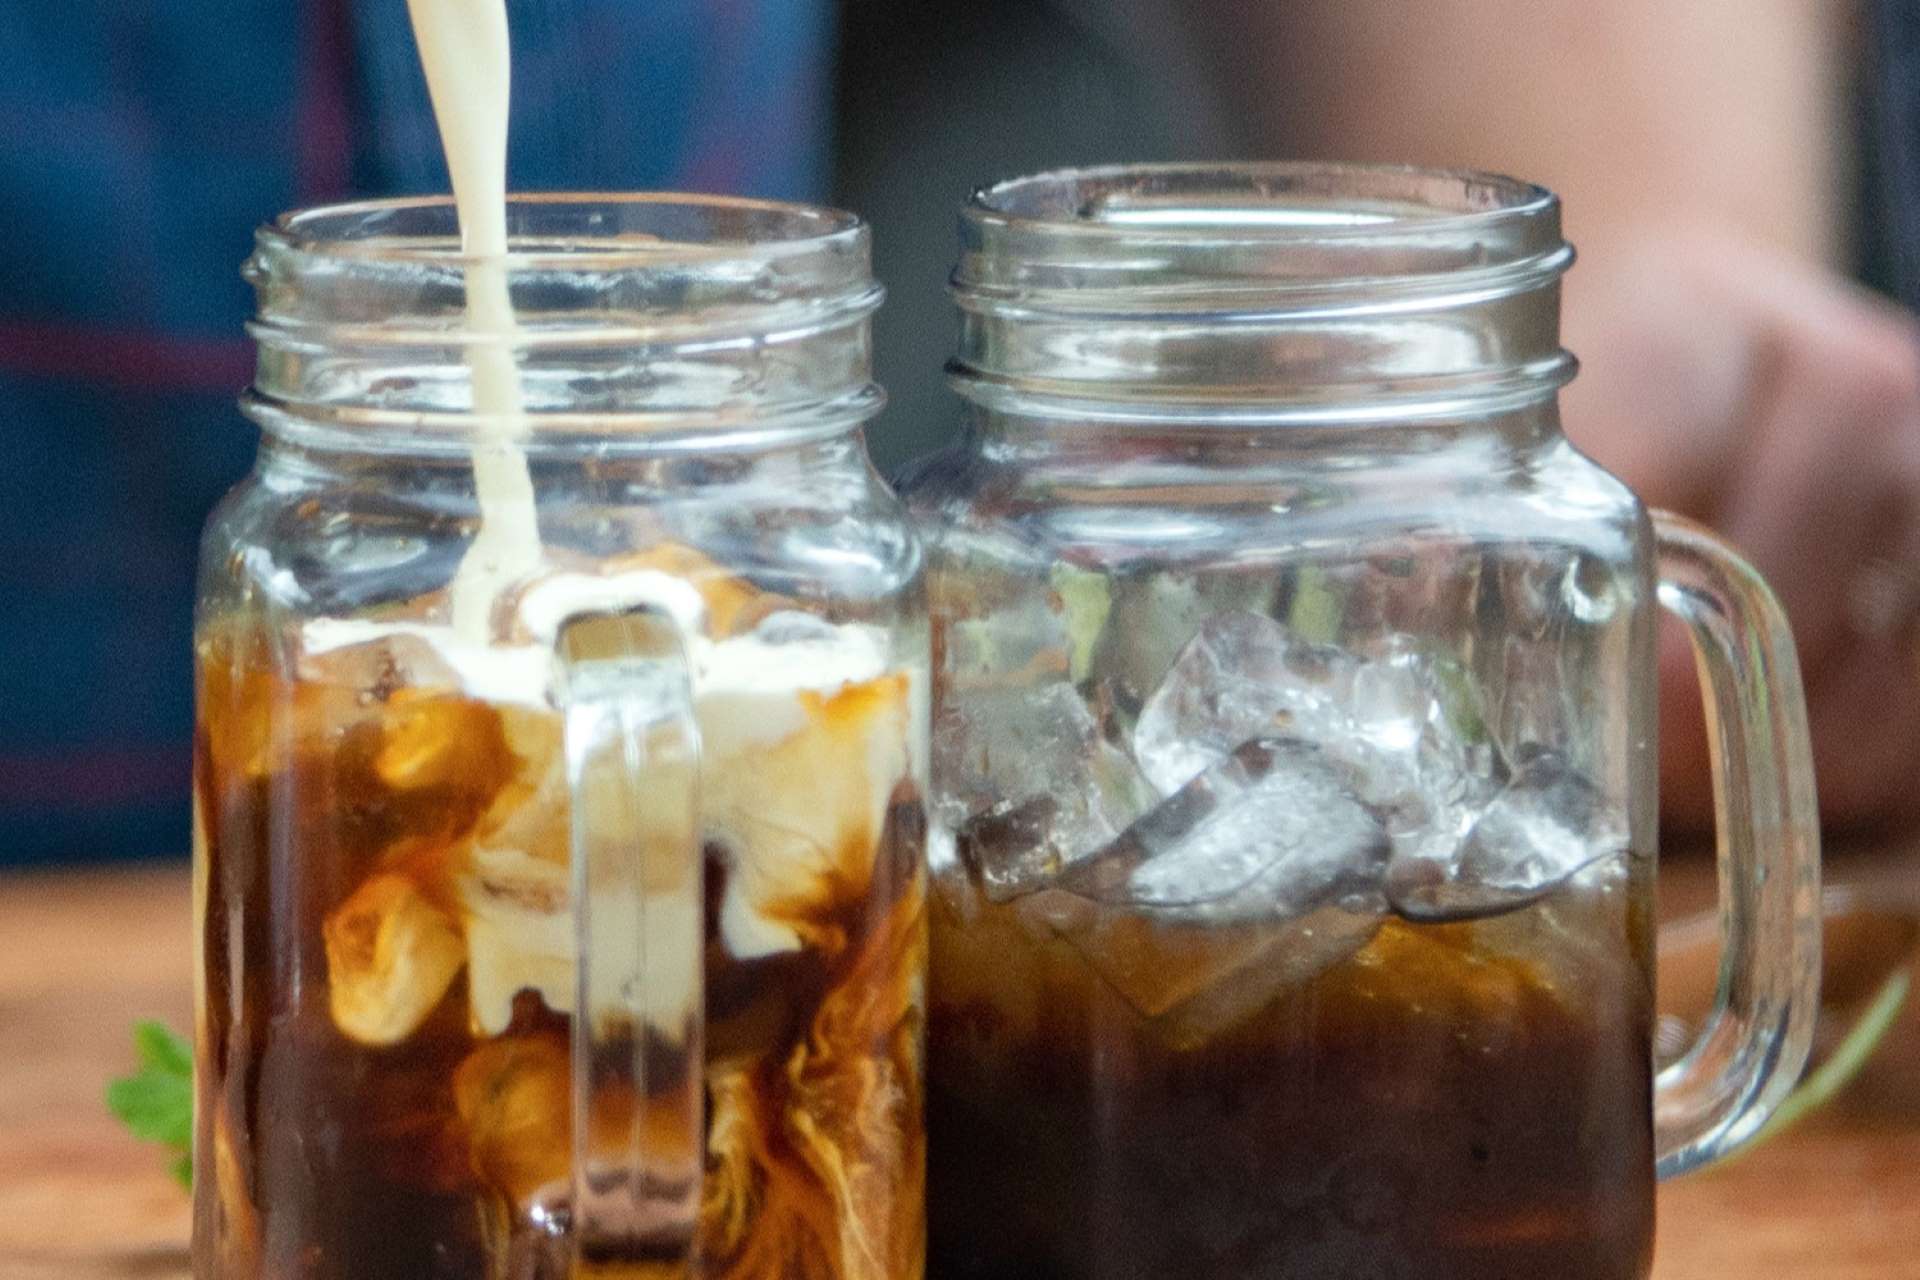 How To Make Cold Brew Coffee At Home